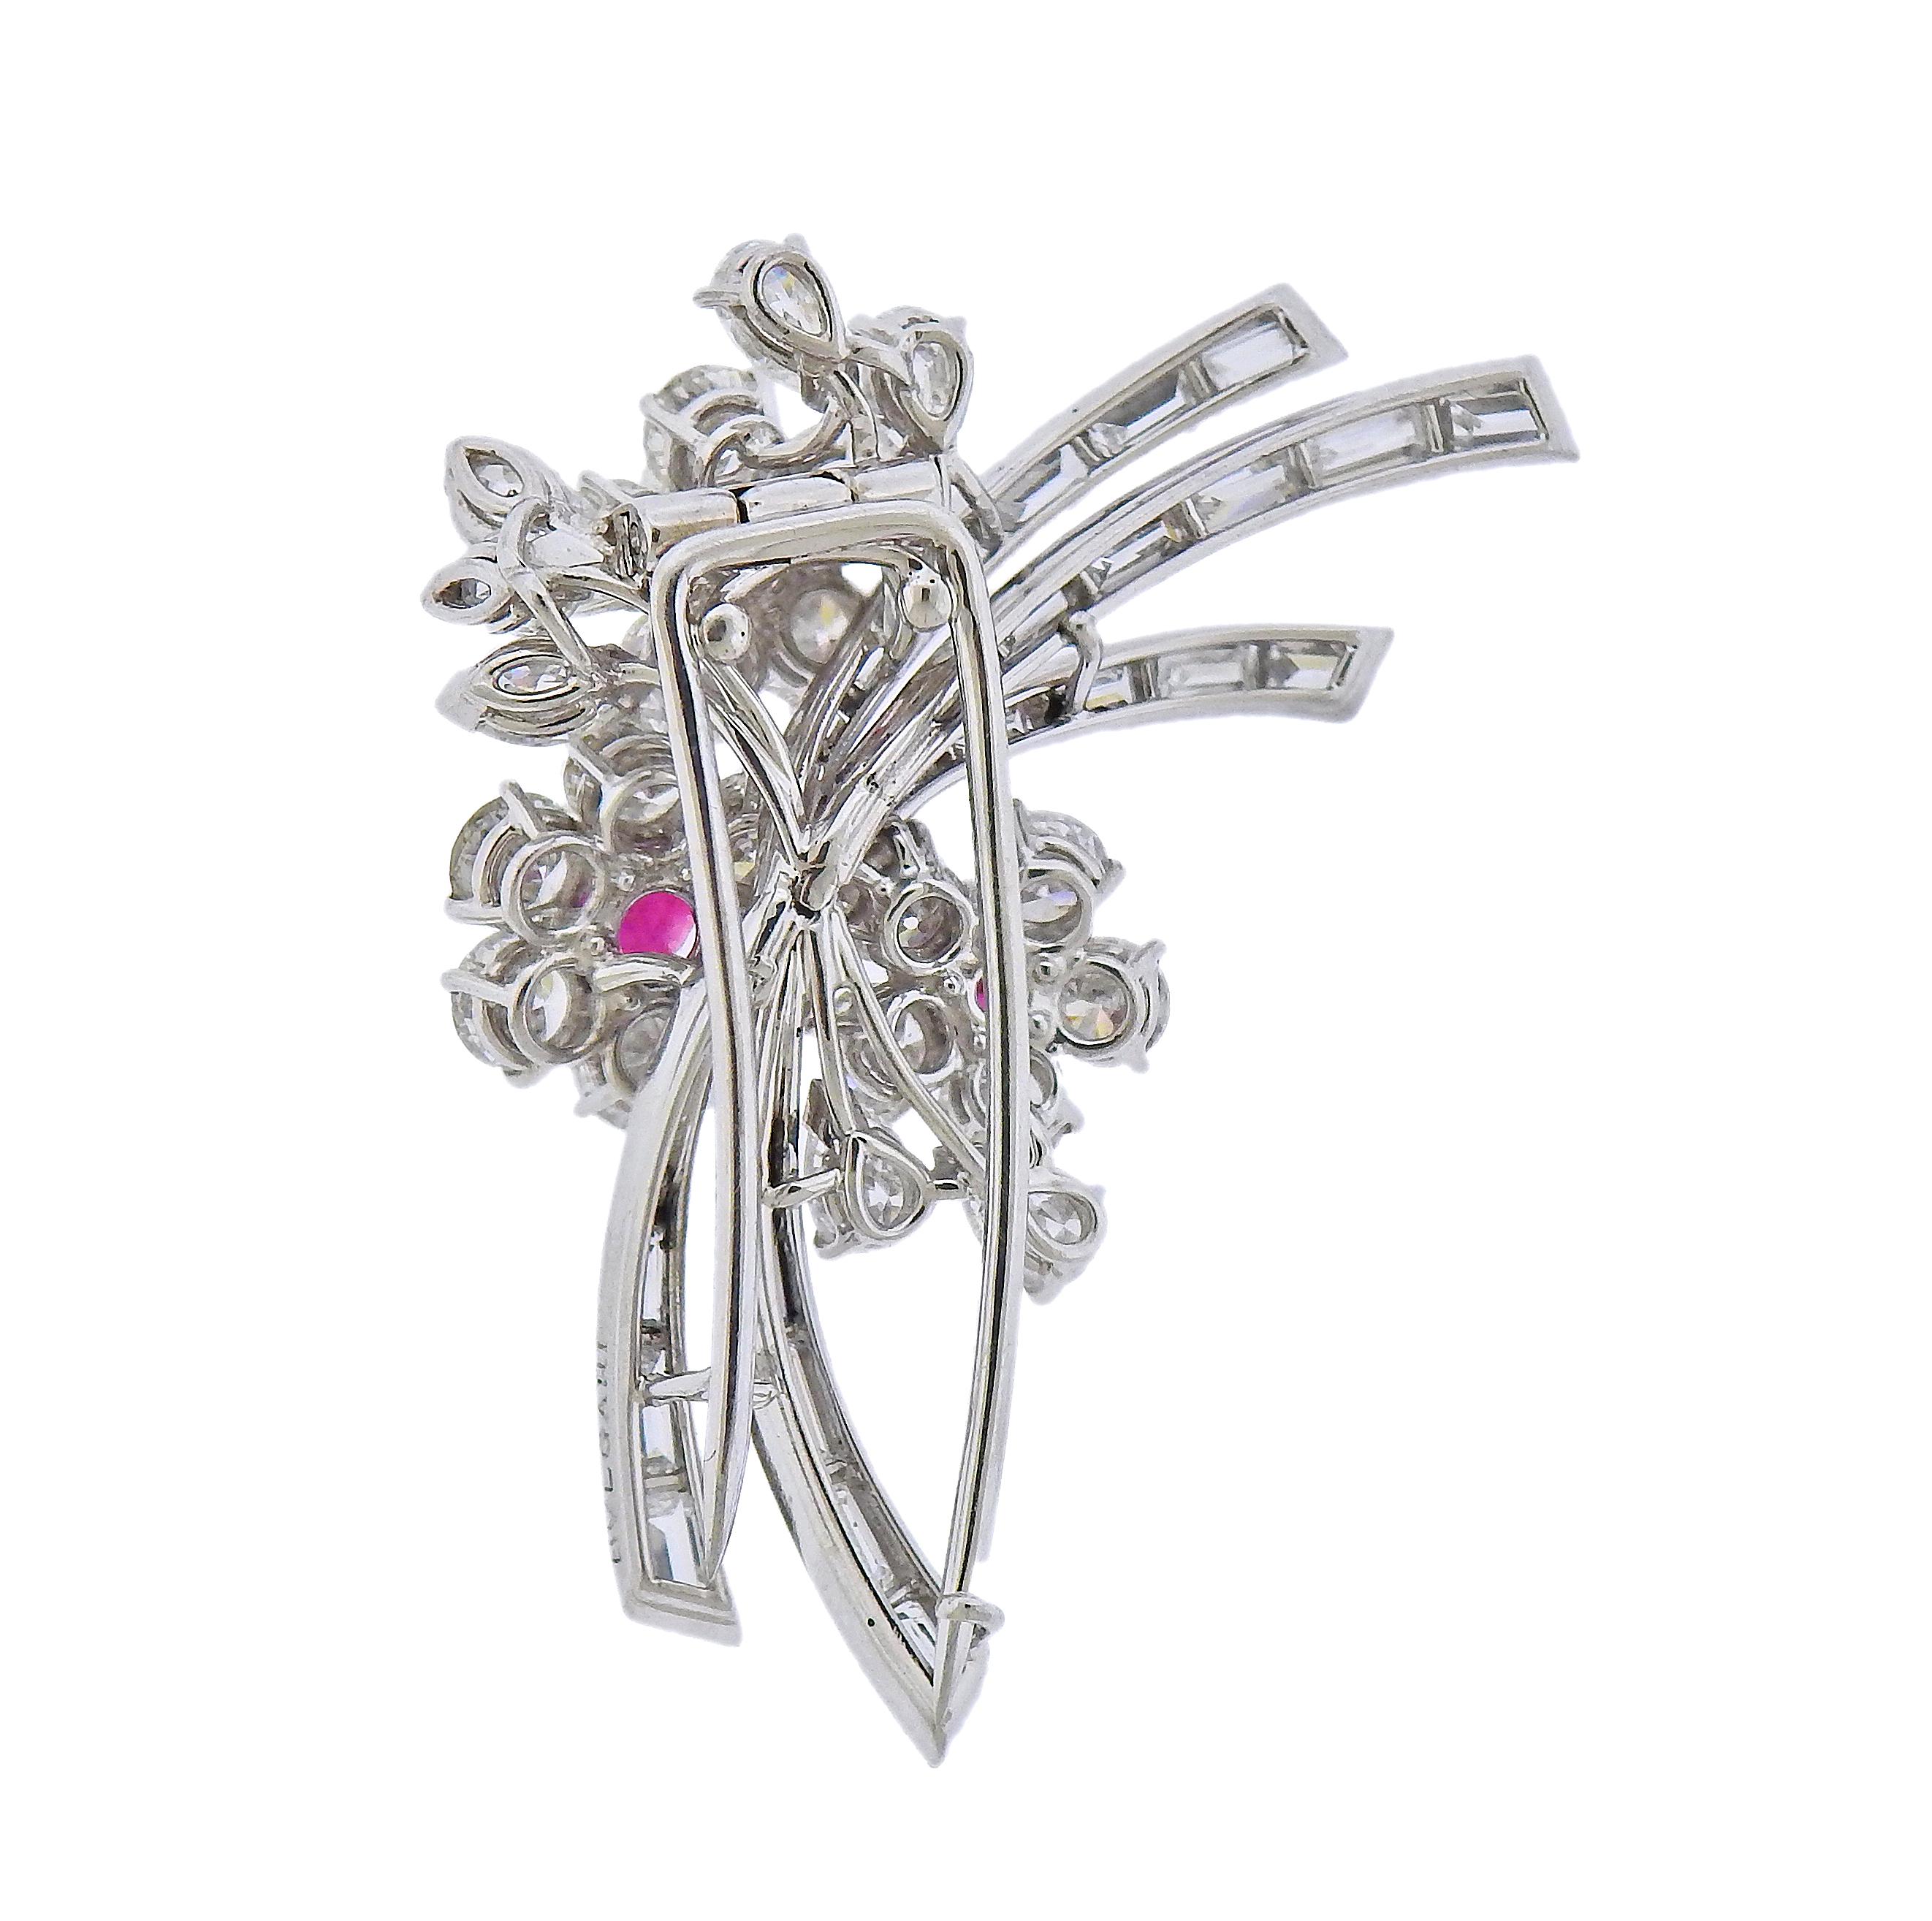 Platinum Bvlgari floral brooch, adorned with three round rubies - measuring approx. 4.4mm, 4.1mm and 4.95mm in diameter, surrounded with round , marquise, pear and baguette cut diamonds - total 5.50-6.00ctw. Brooch is 42mm x 26mm. Marked: Bvlgari.